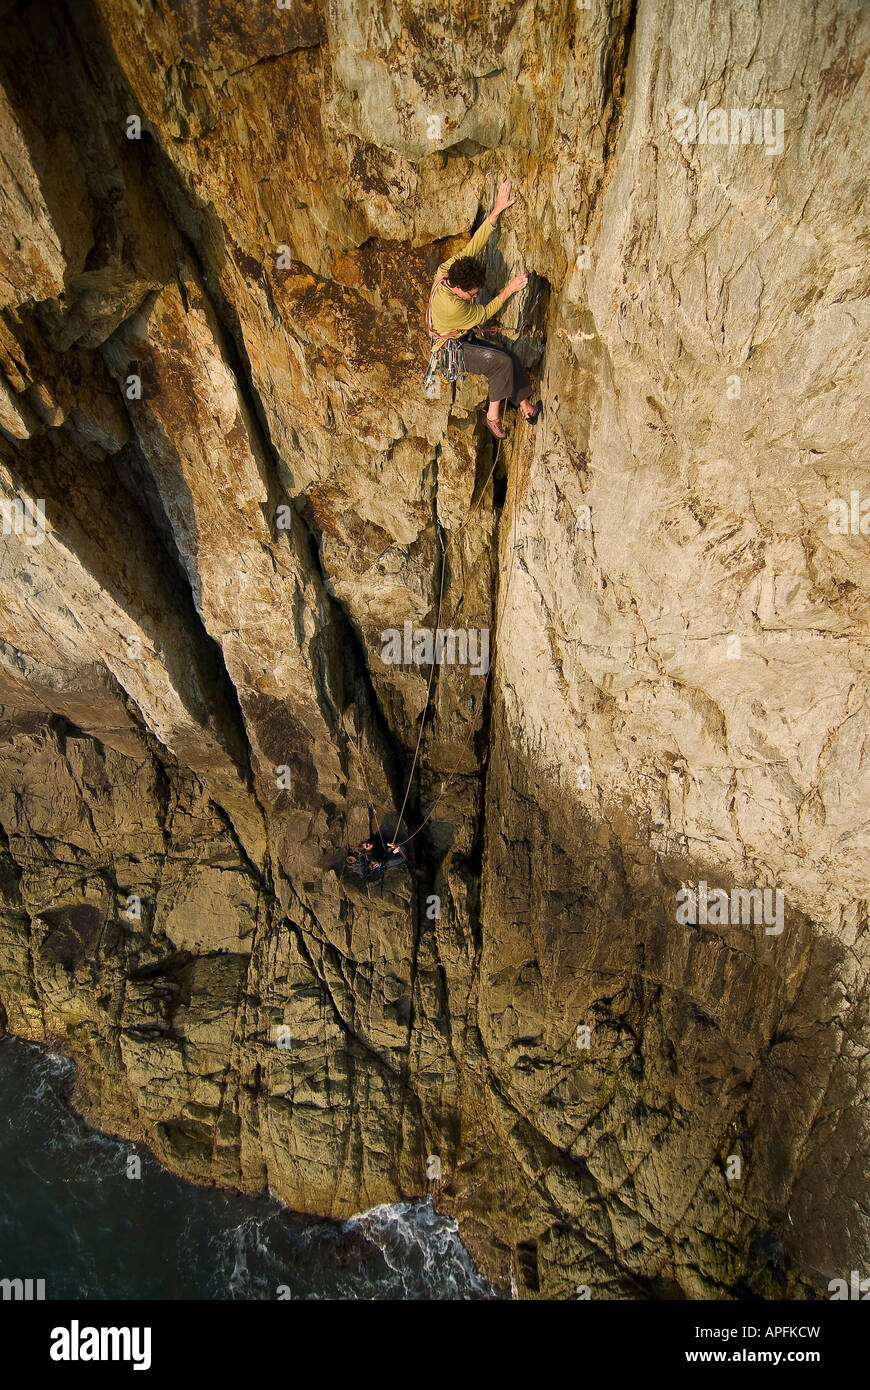 rock Climbing, sea clif, climber in extremis Stock Photo